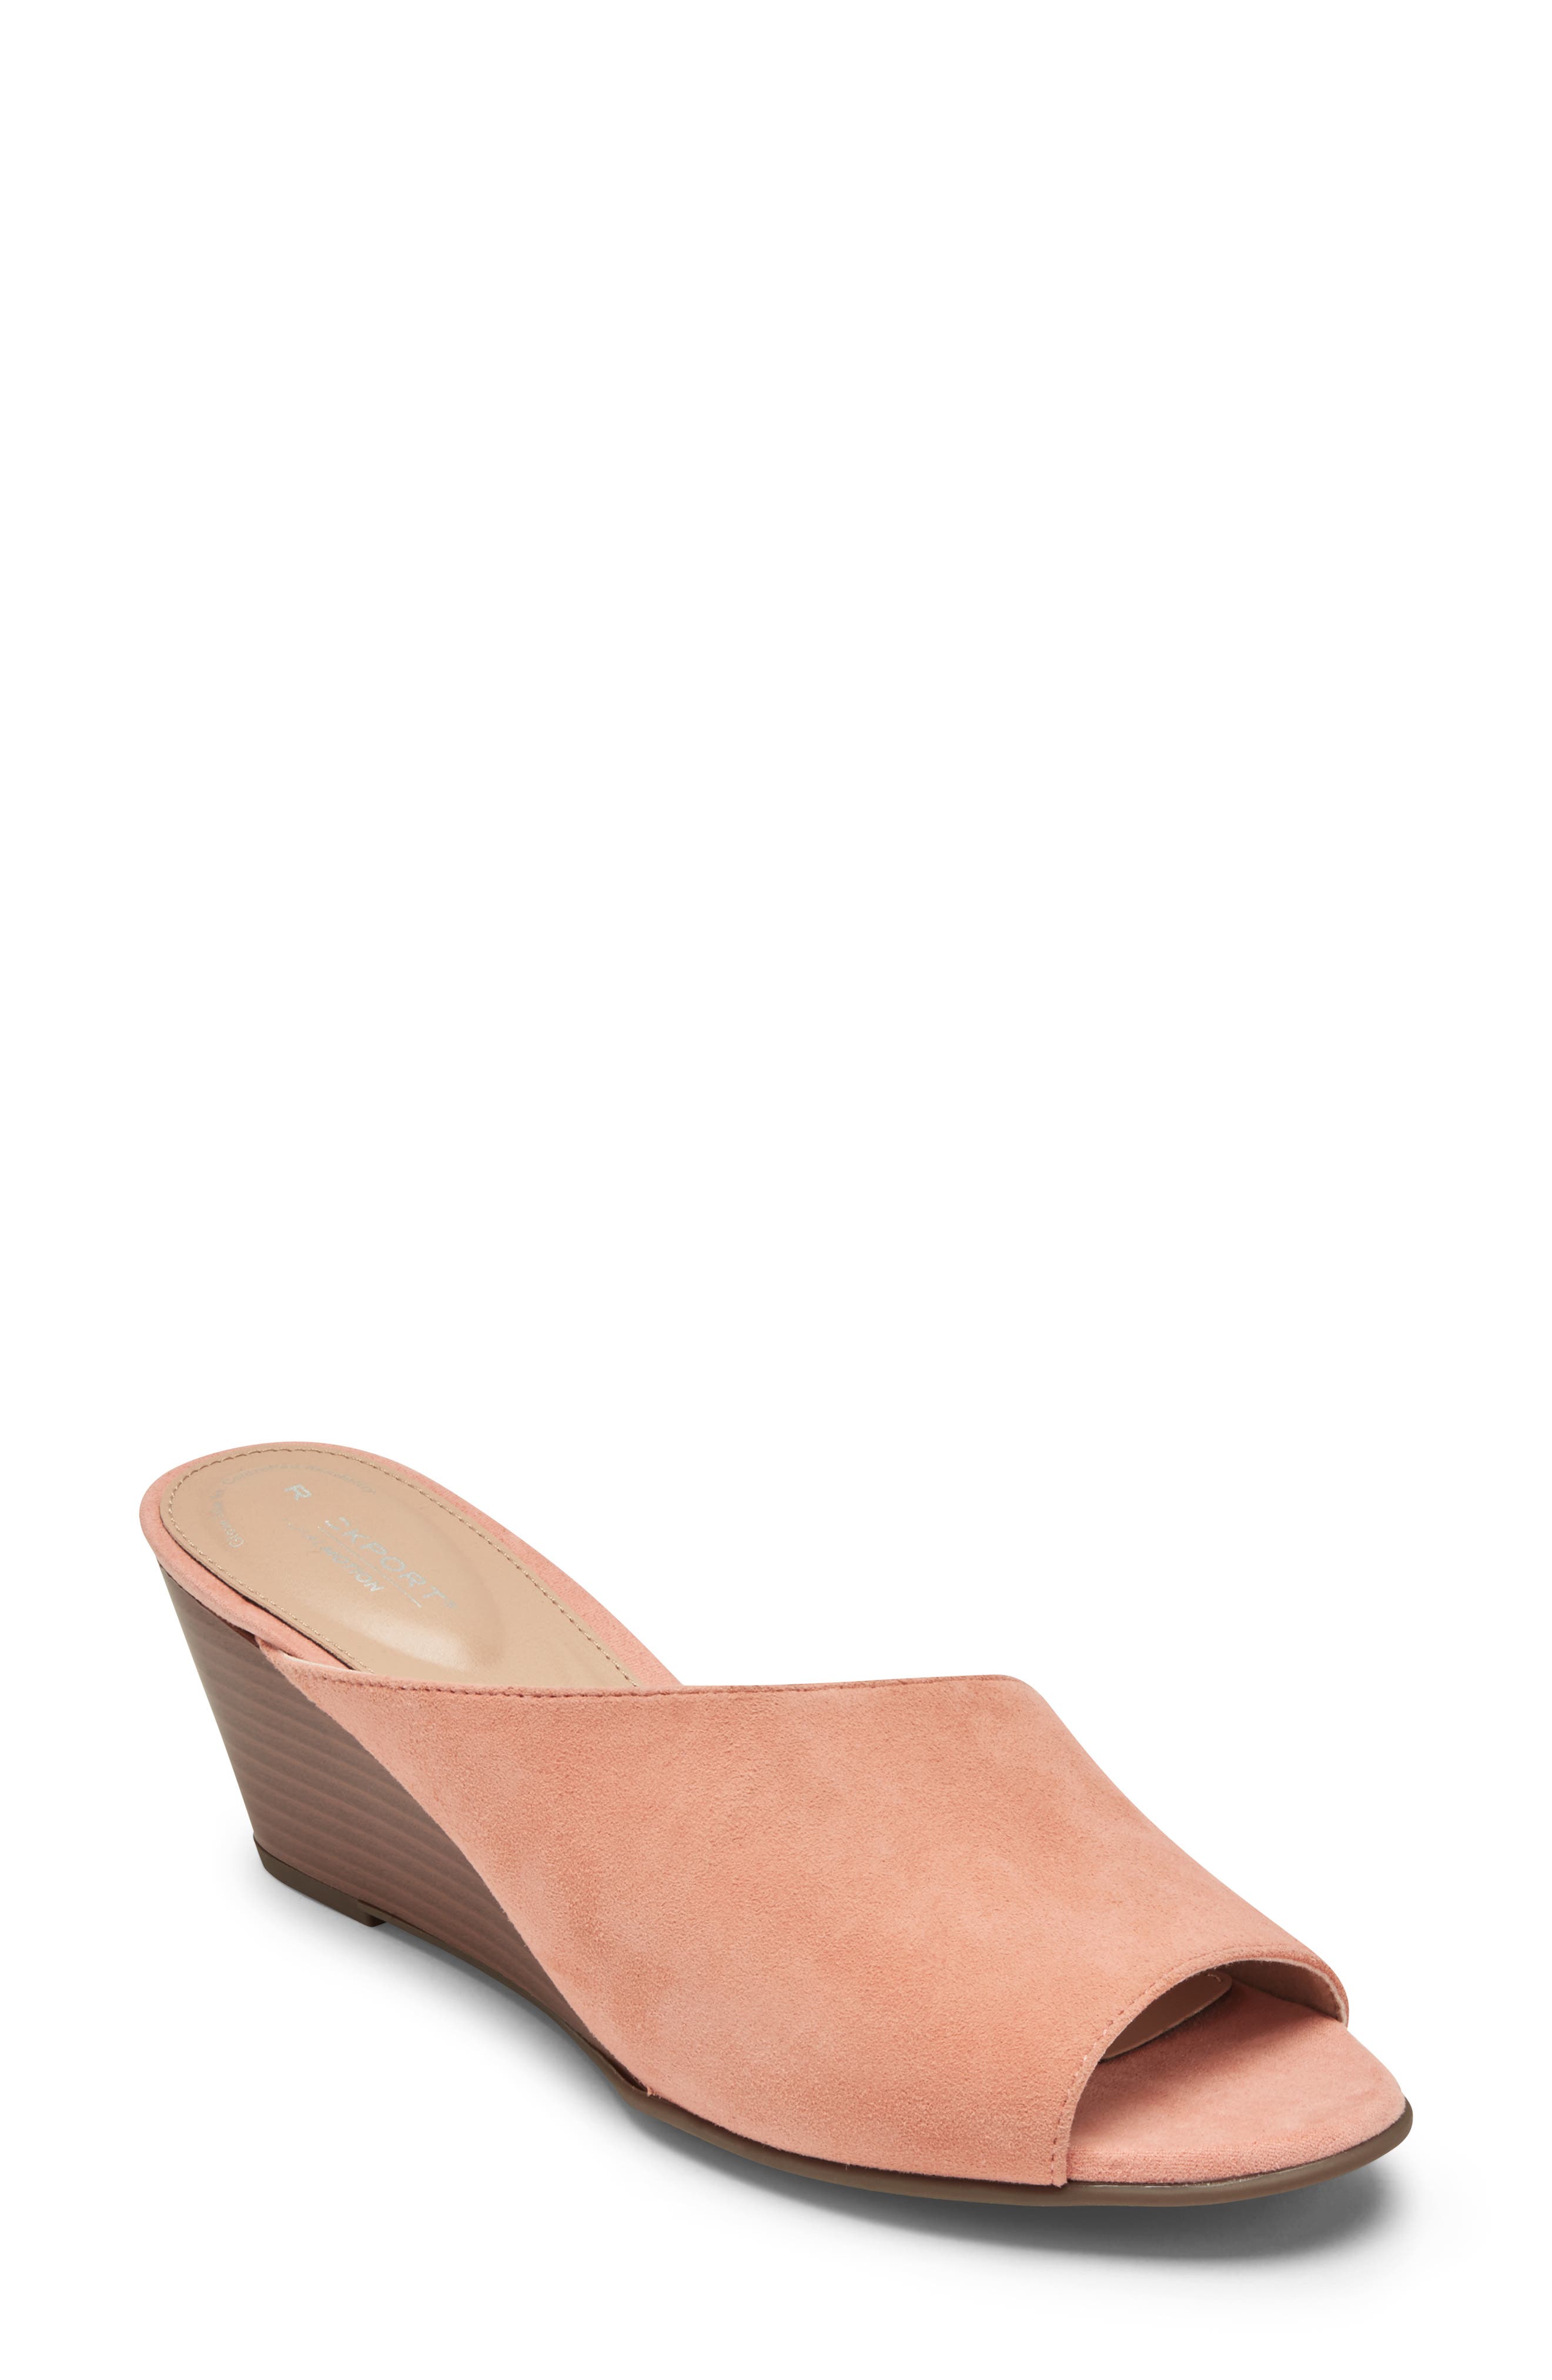 All Women's Coral Sale Wide Shoes 